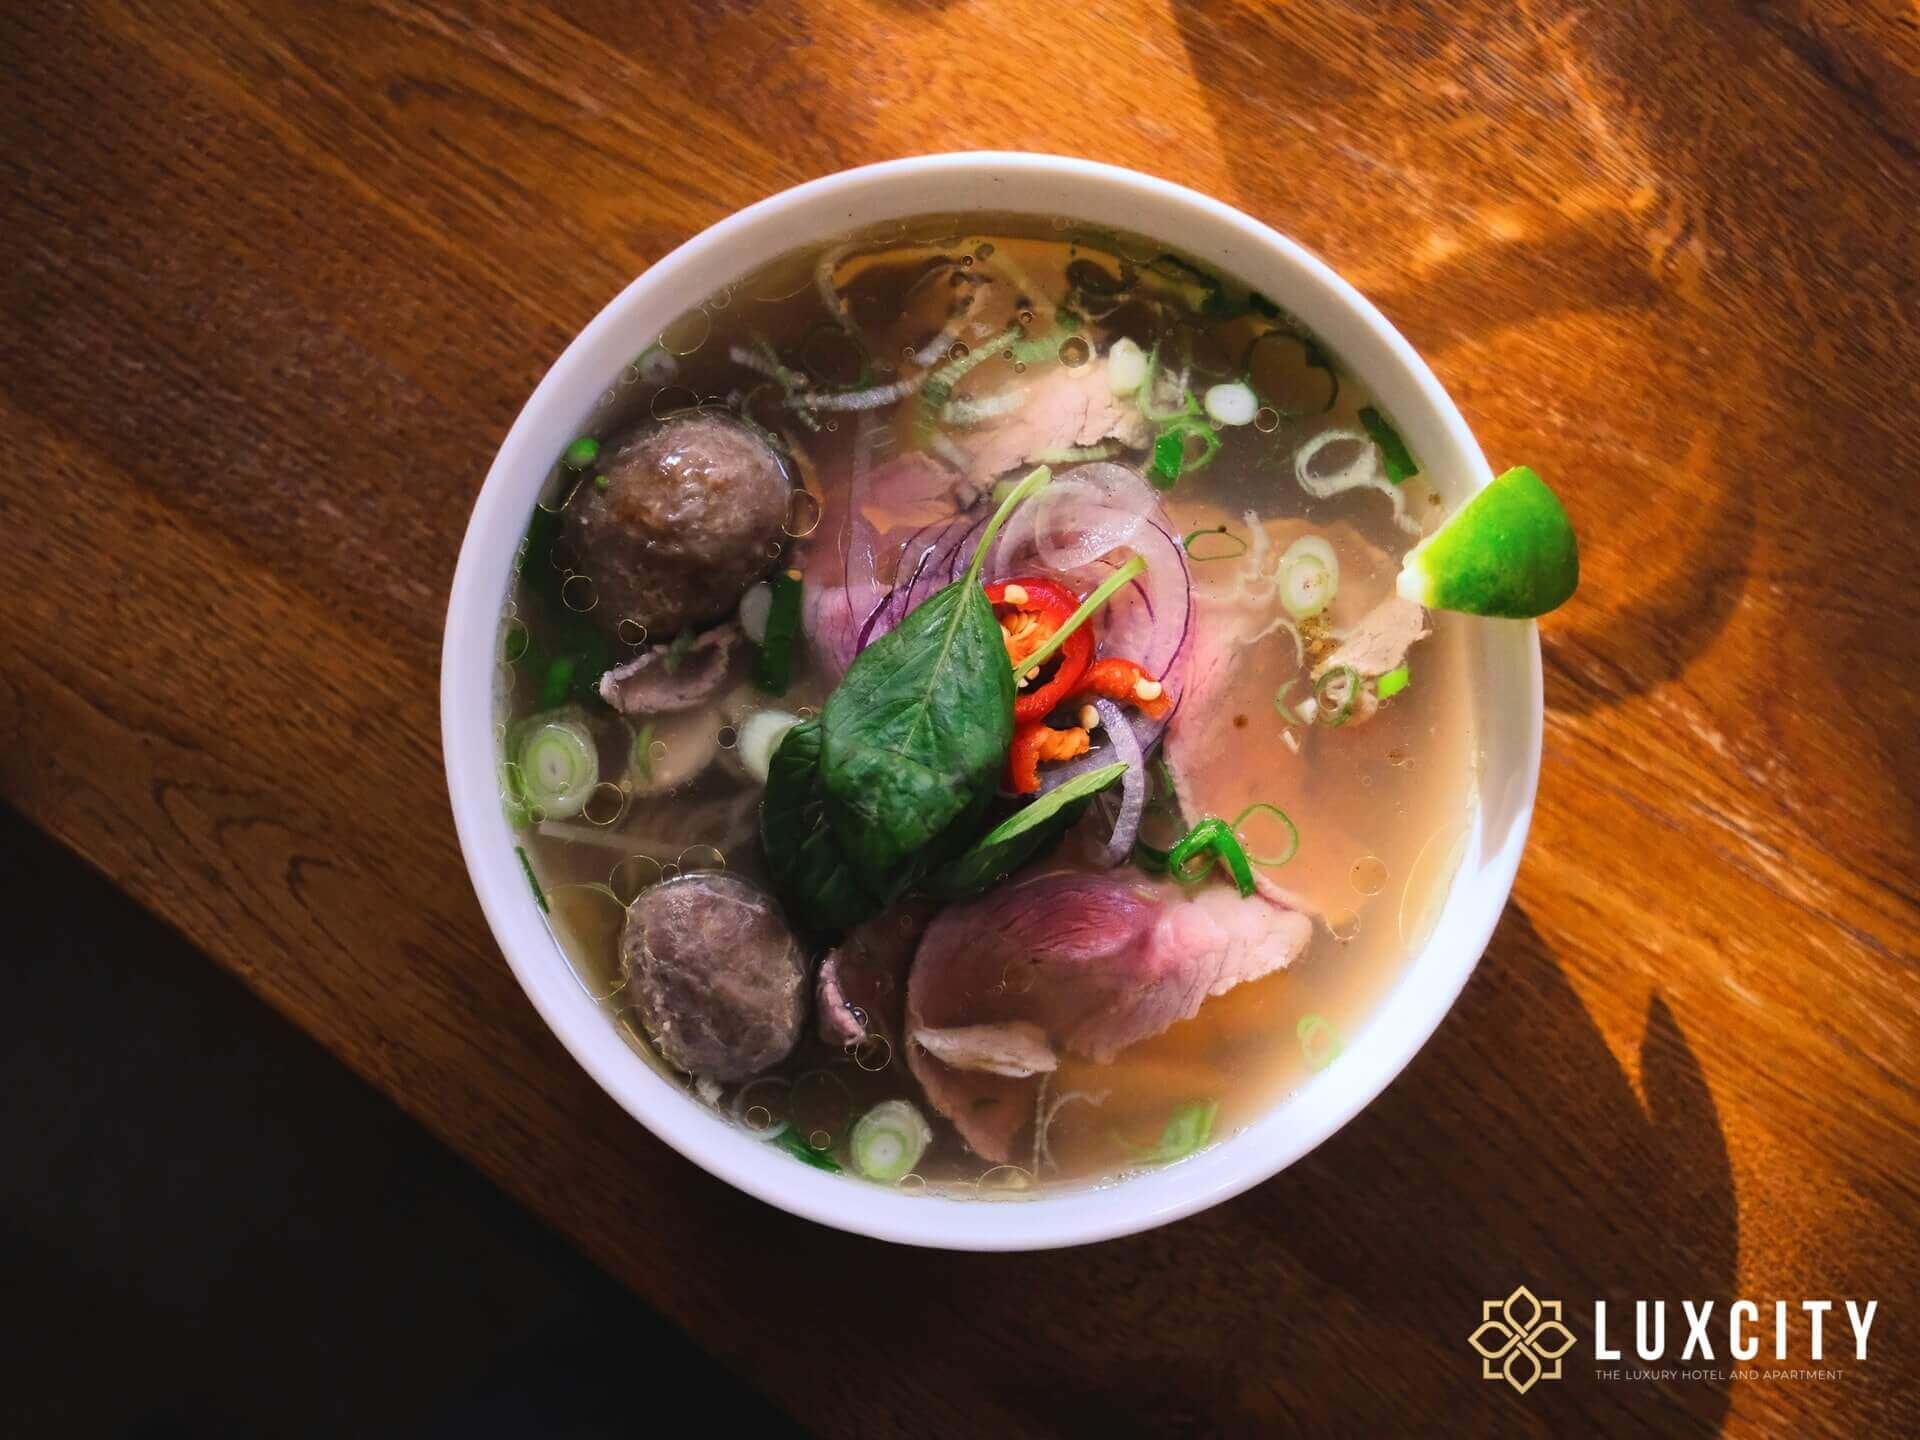 Light and mouthful broth with yummy steak bites